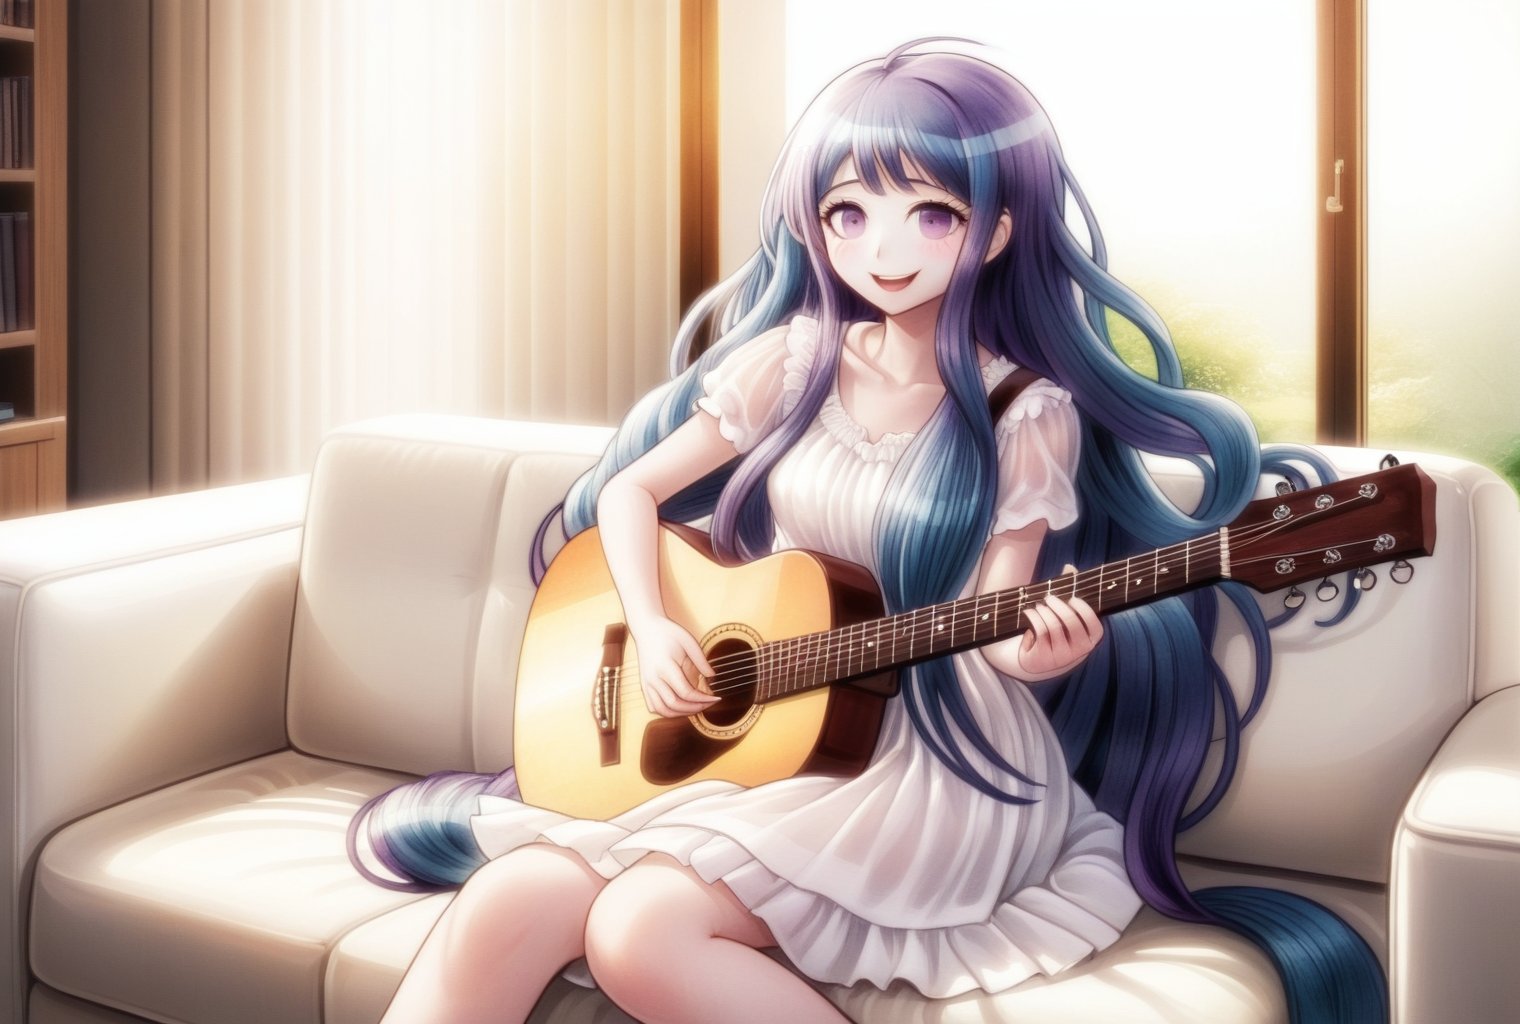 a smiling girl with purple eyes and long blue hair in a white dress sitting on a sofa playing on a guitar, sunlight through a window, hair reflection, komatsuzaki rui style <lora:danganronpa_style:0.8>